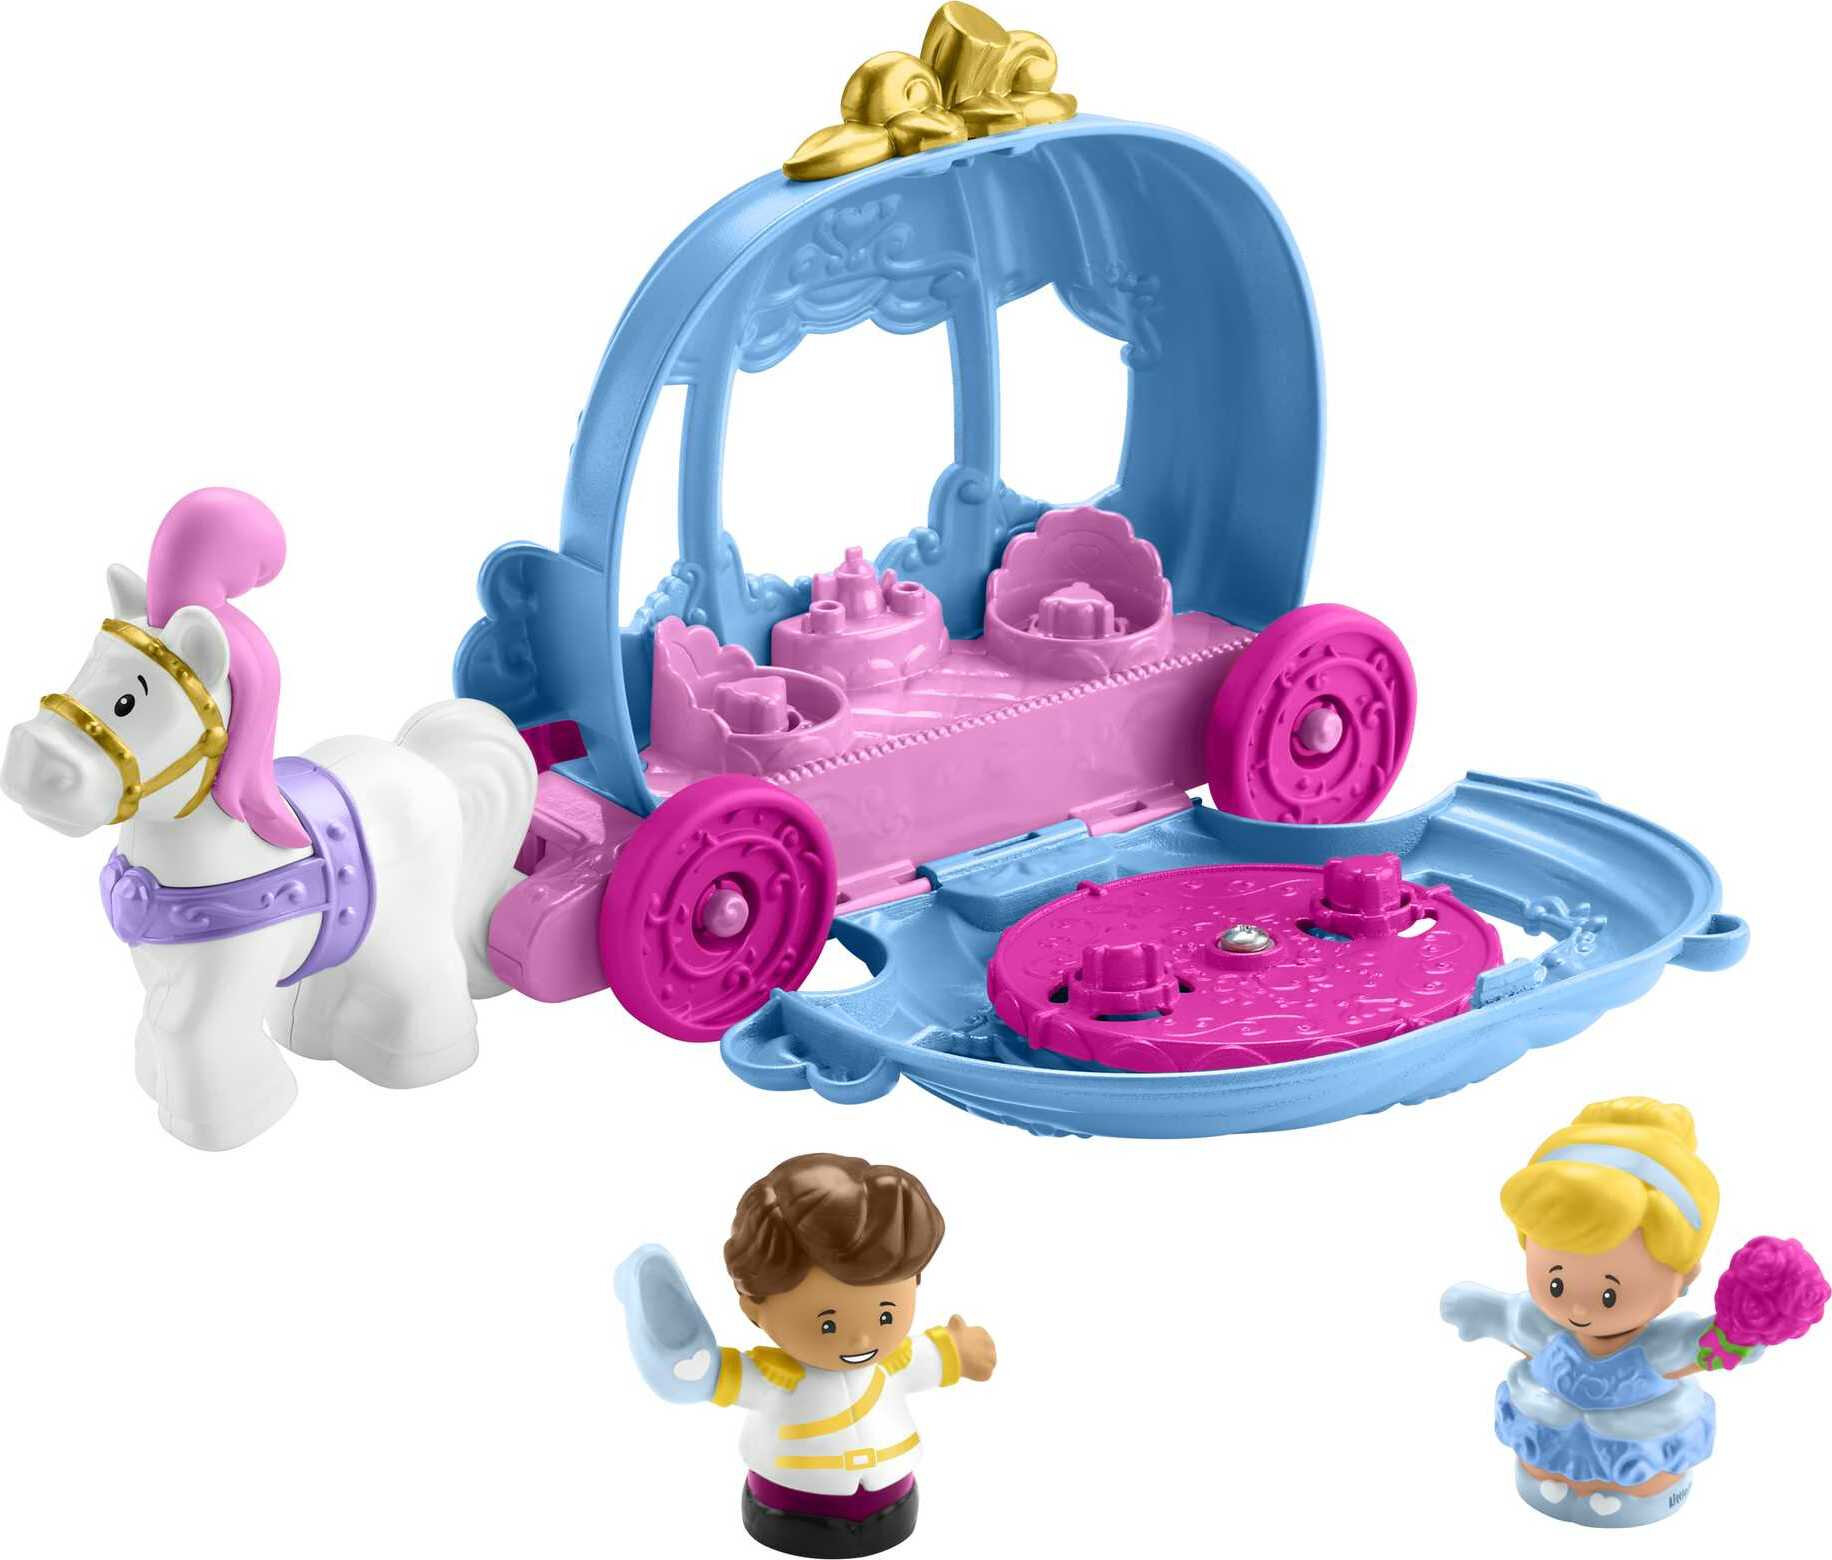 Disney Princess Cinderella’s Dancing Carriage Little People Toddler Playset with Horse & Figures - image 1 of 6